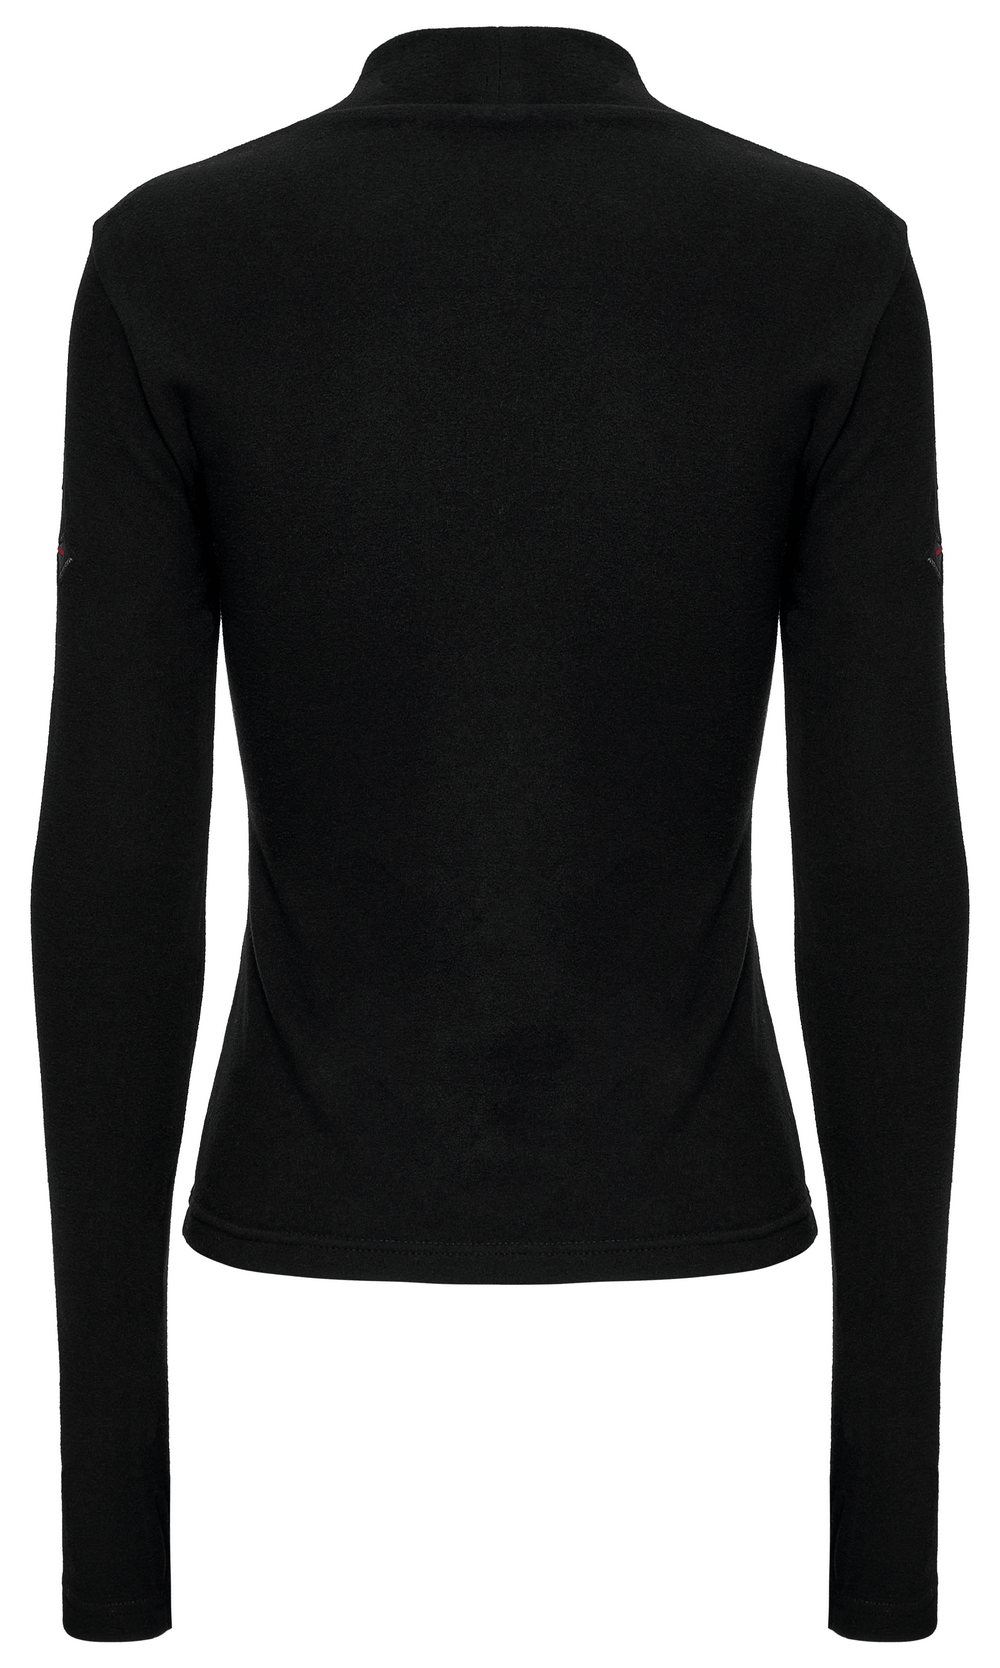 Black Turtleneck Top with Gothic Cross Appliques